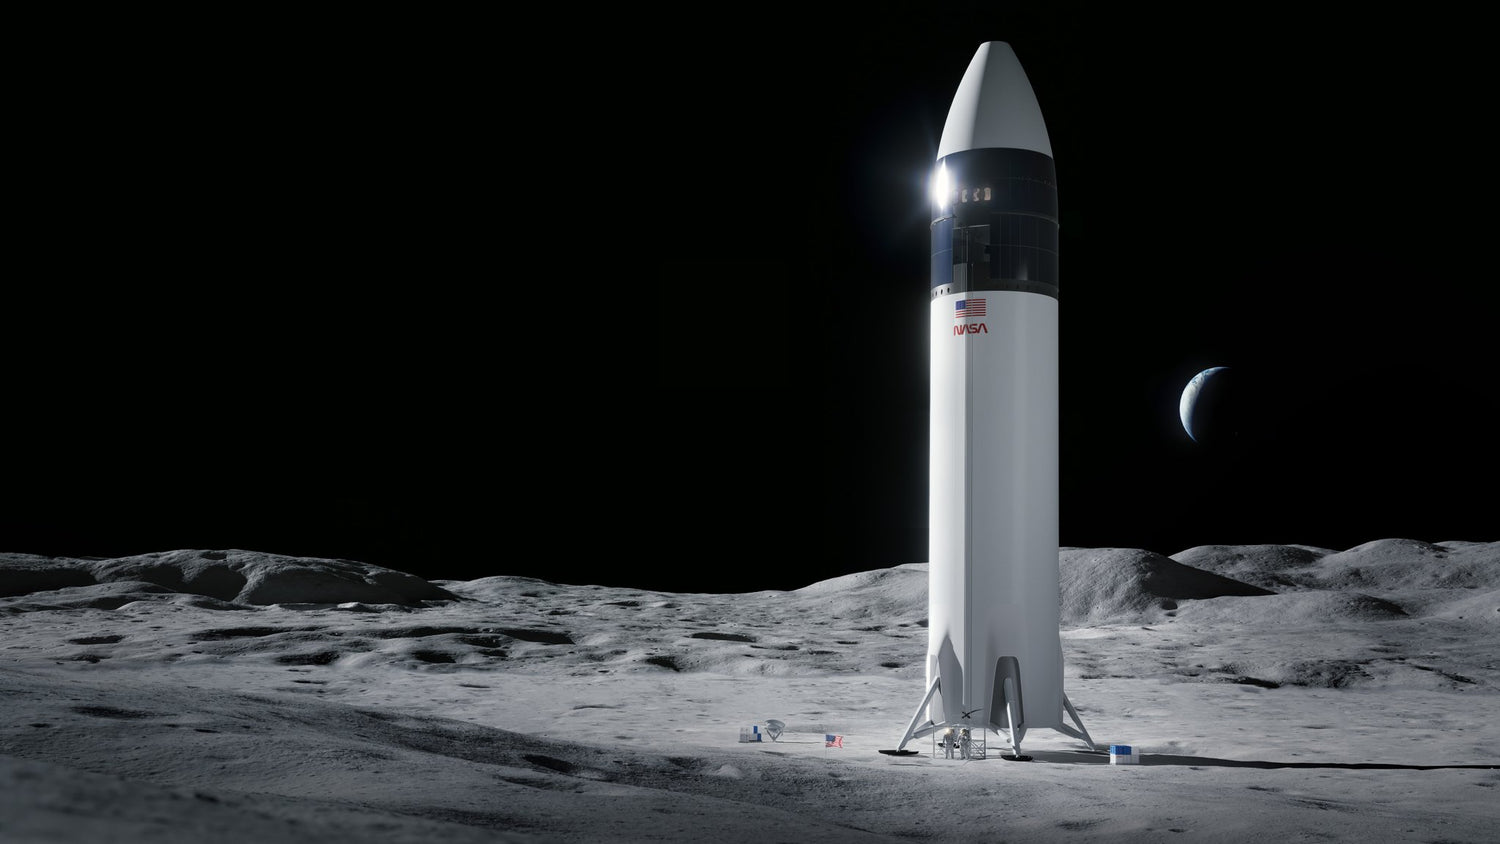 NASA Awards SpaceX A Second Artemis Program Starship Mission To Land Astronauts On The Moon